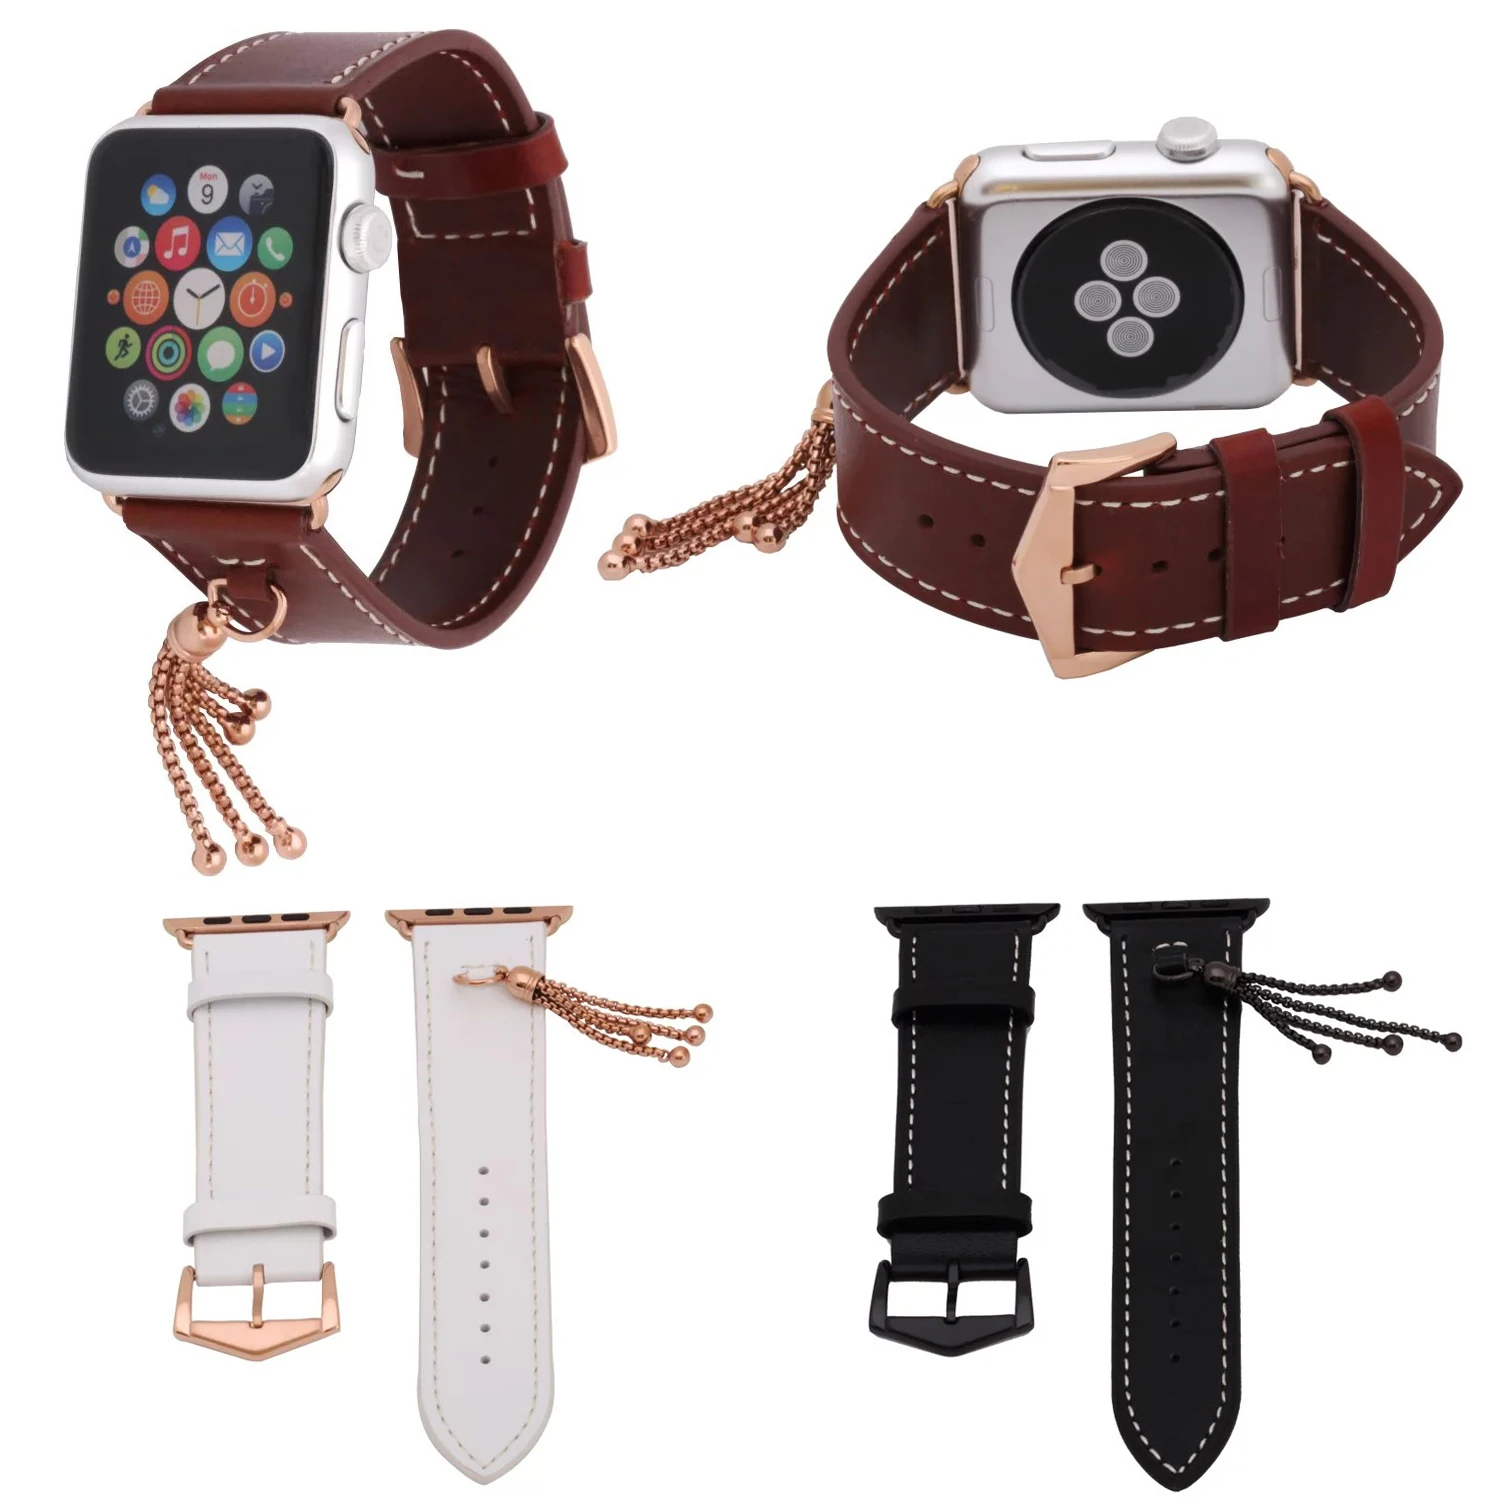 

Tassels Genuine Leather Band For iWatch 1st 2nd Cowhide Strap for Apple Watch Series 2 Watchband with Small Ornaments 42mm 38mm